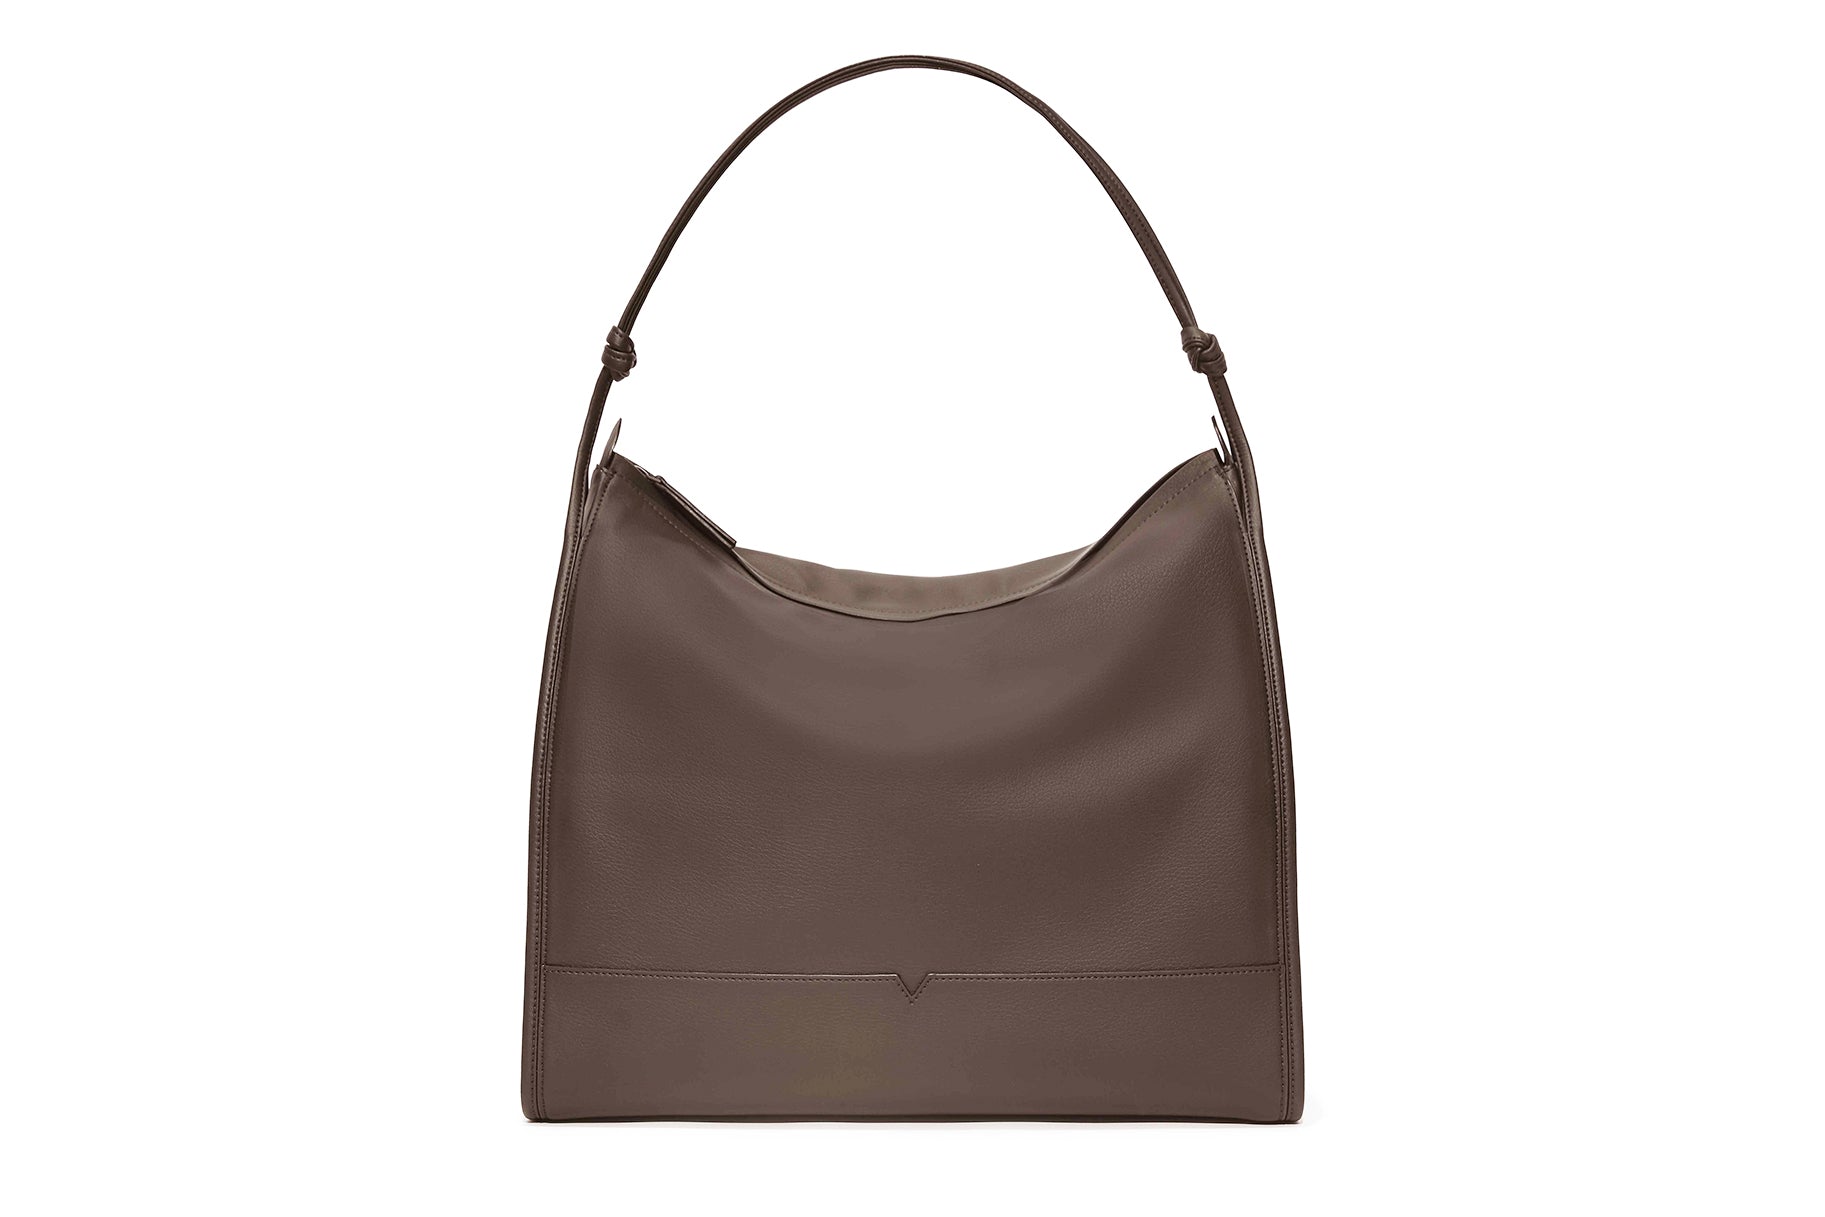 The Shoulder Bag in Banbū in Taupe image 1